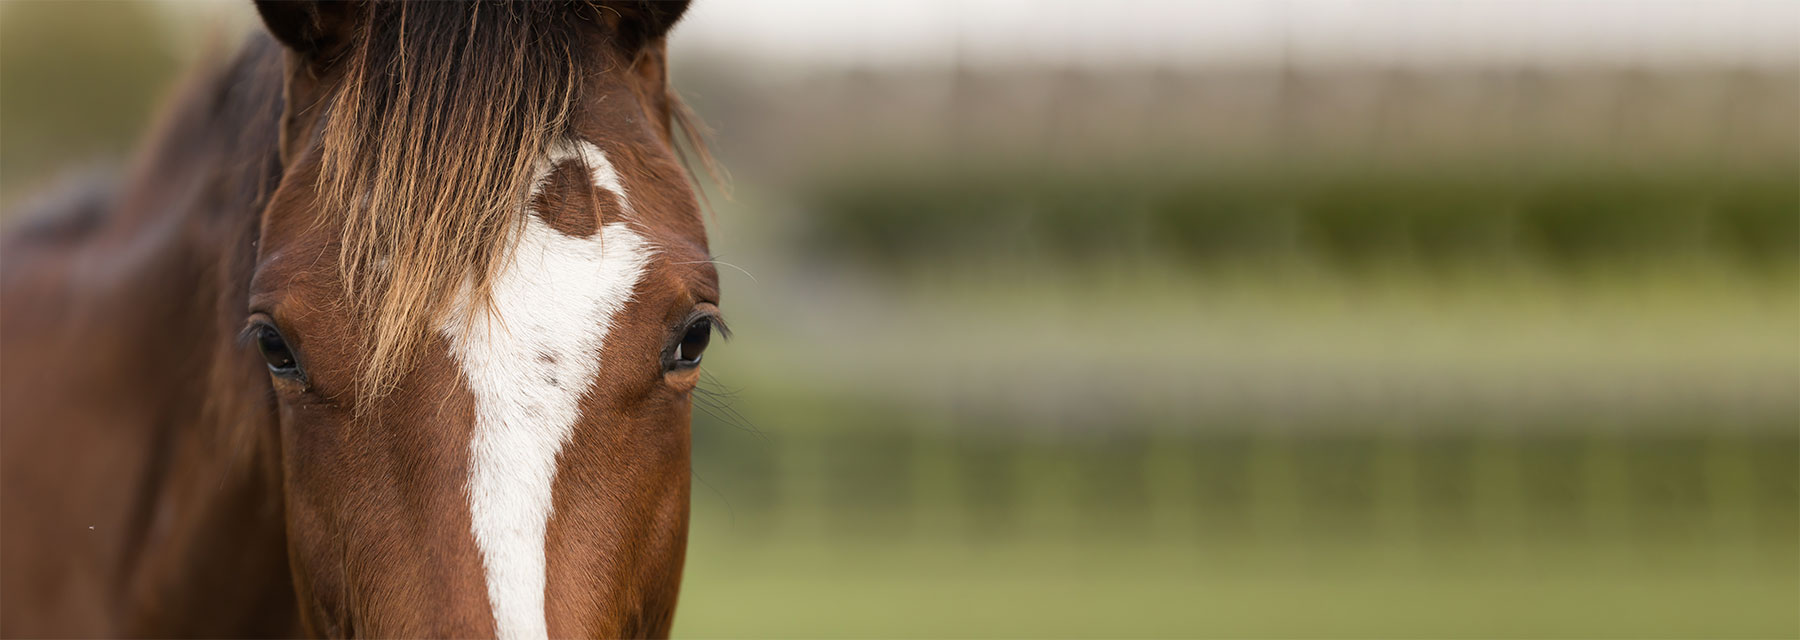 More Targeted Diagnostic Investigations Warranted for Headshaking in Horses – Study 